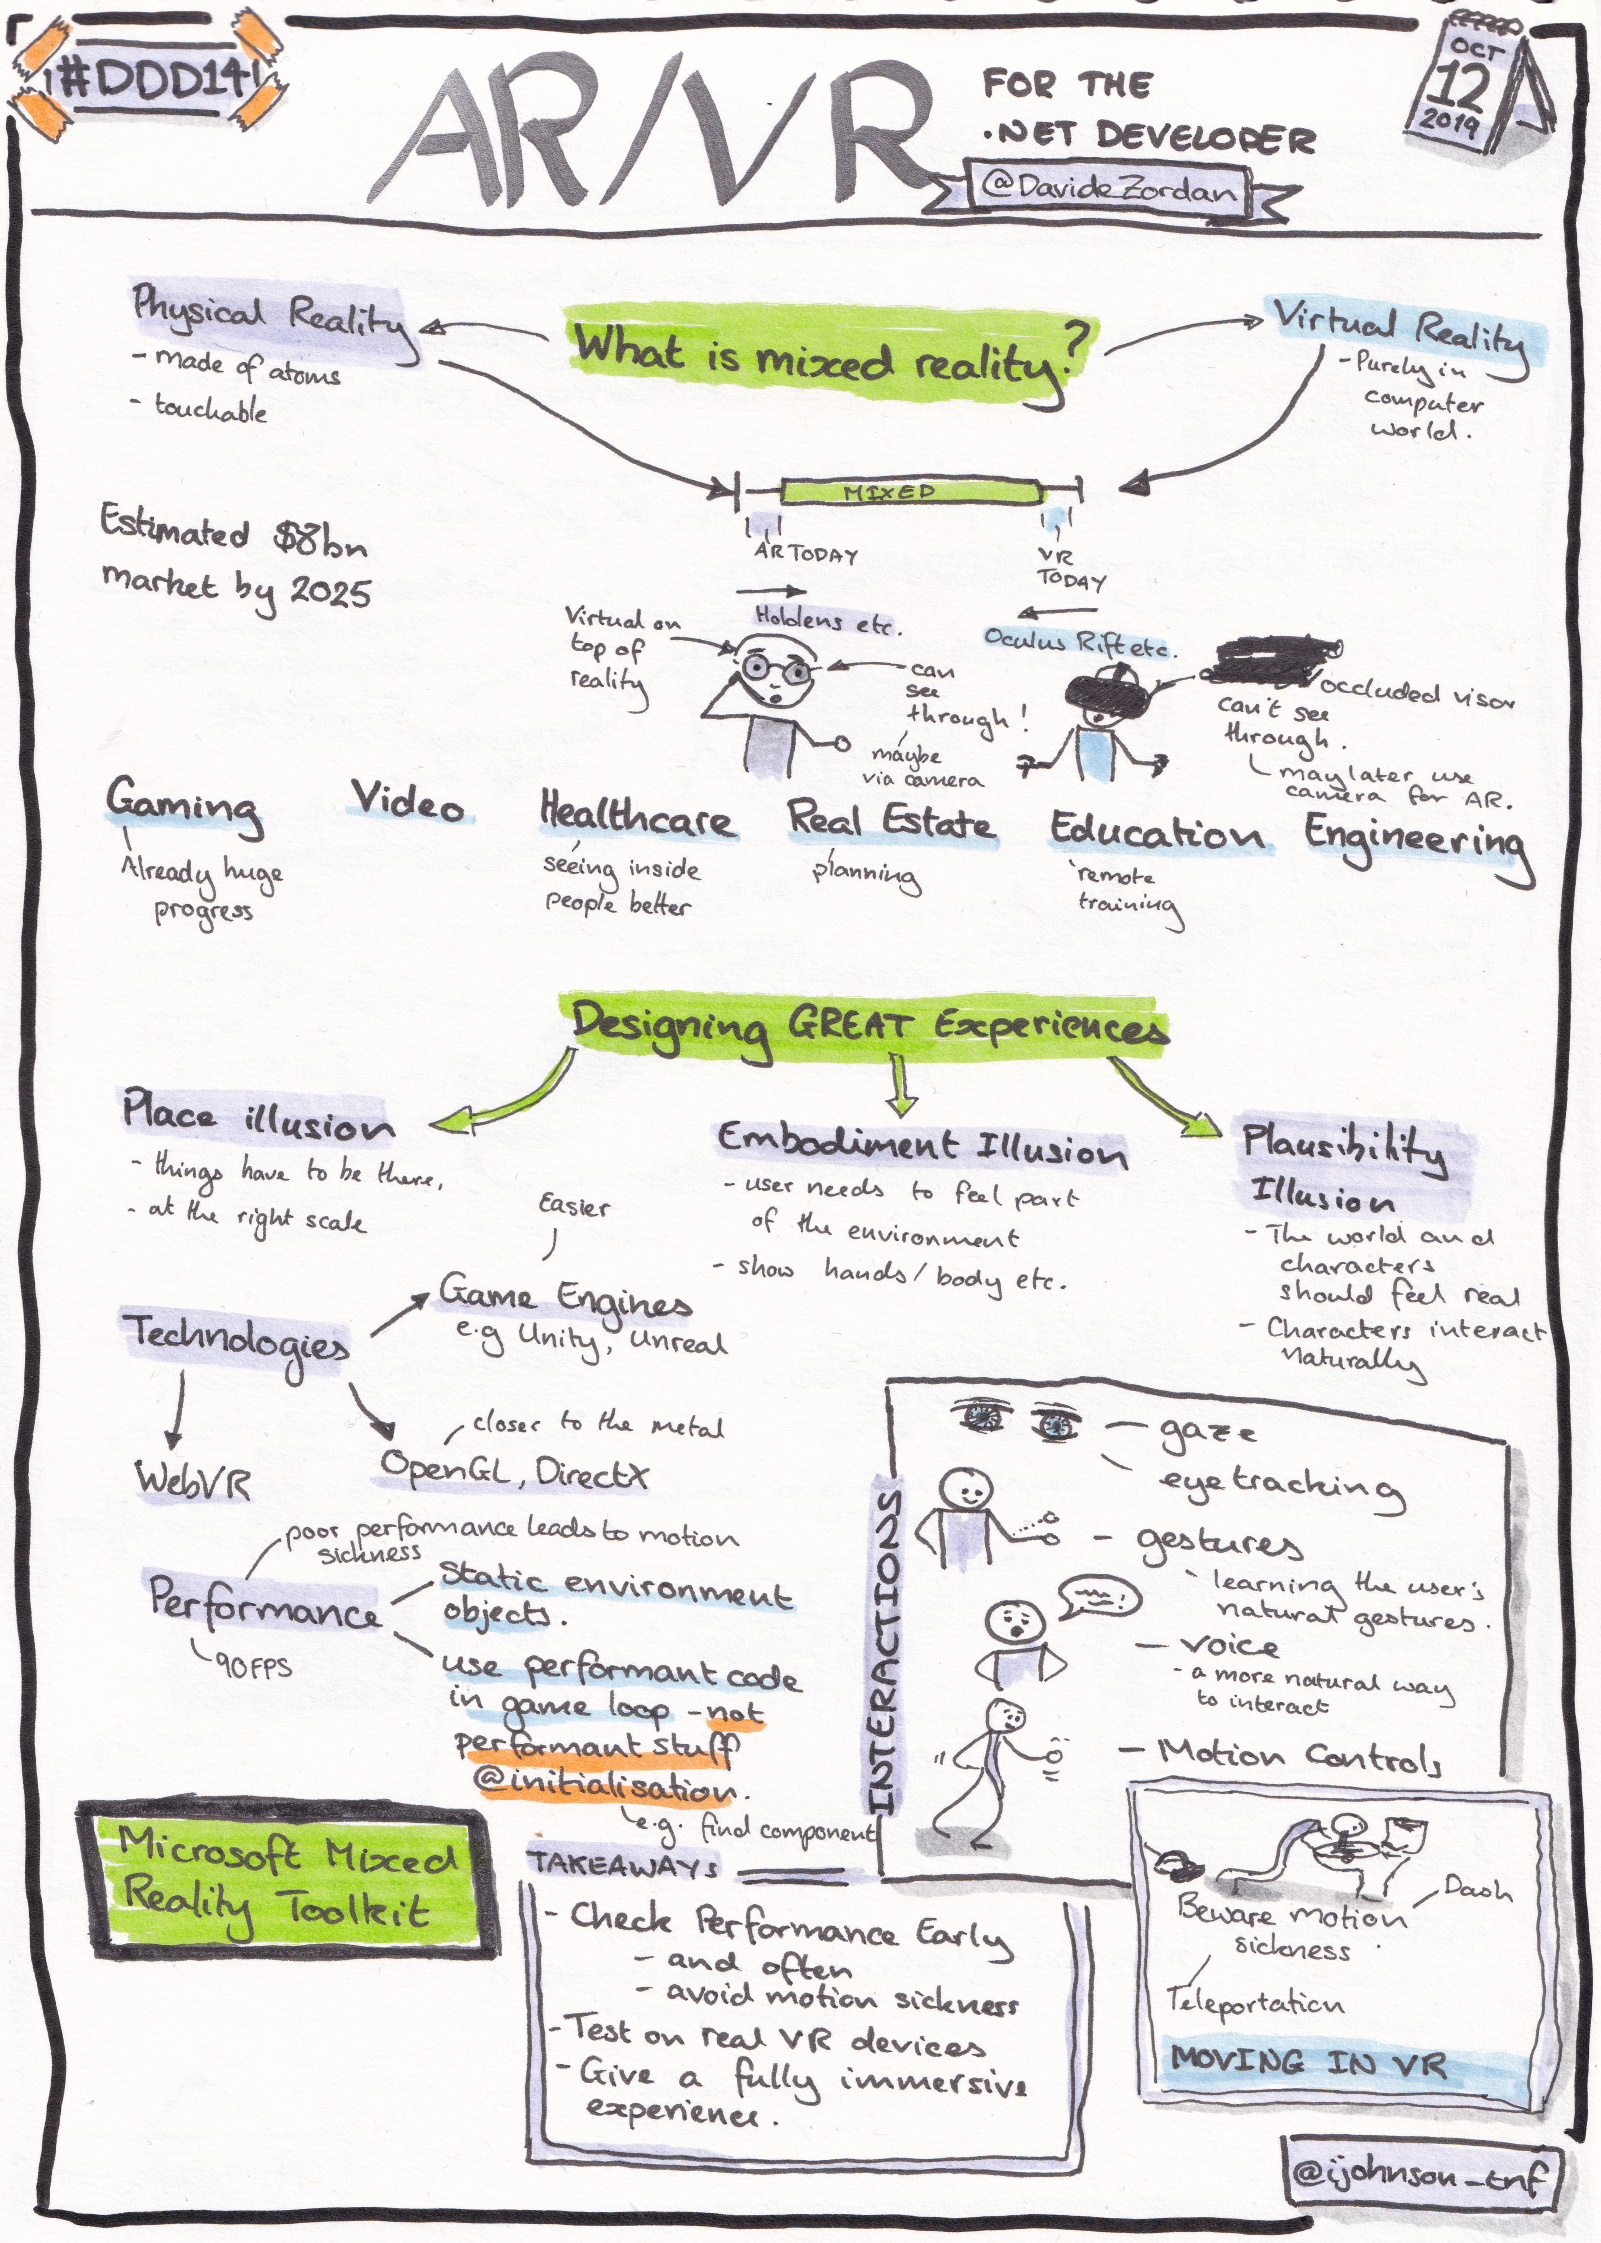 Sketchnotes from the talk 'Azure IoT Hubs' by Pete Gallagher